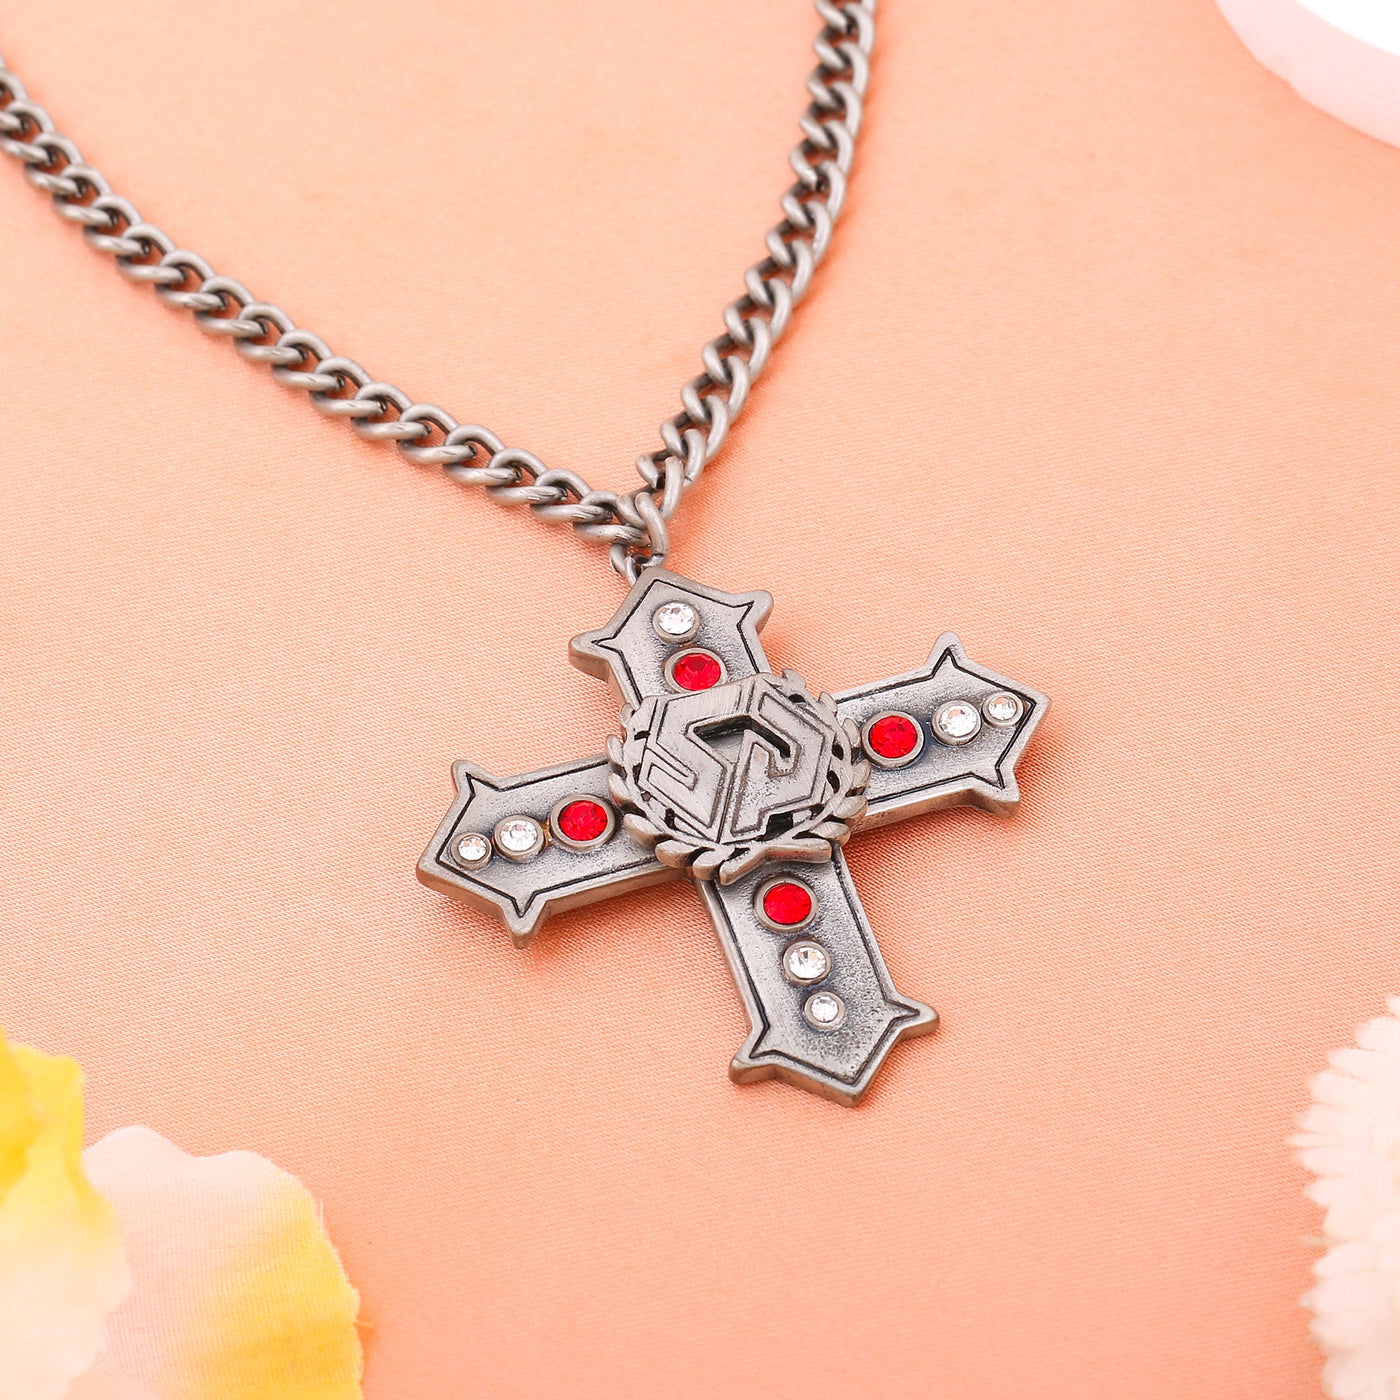 Estele Tin Oxidised Plated Cross Designer Pendant Necklace with Red & White Stone for Women